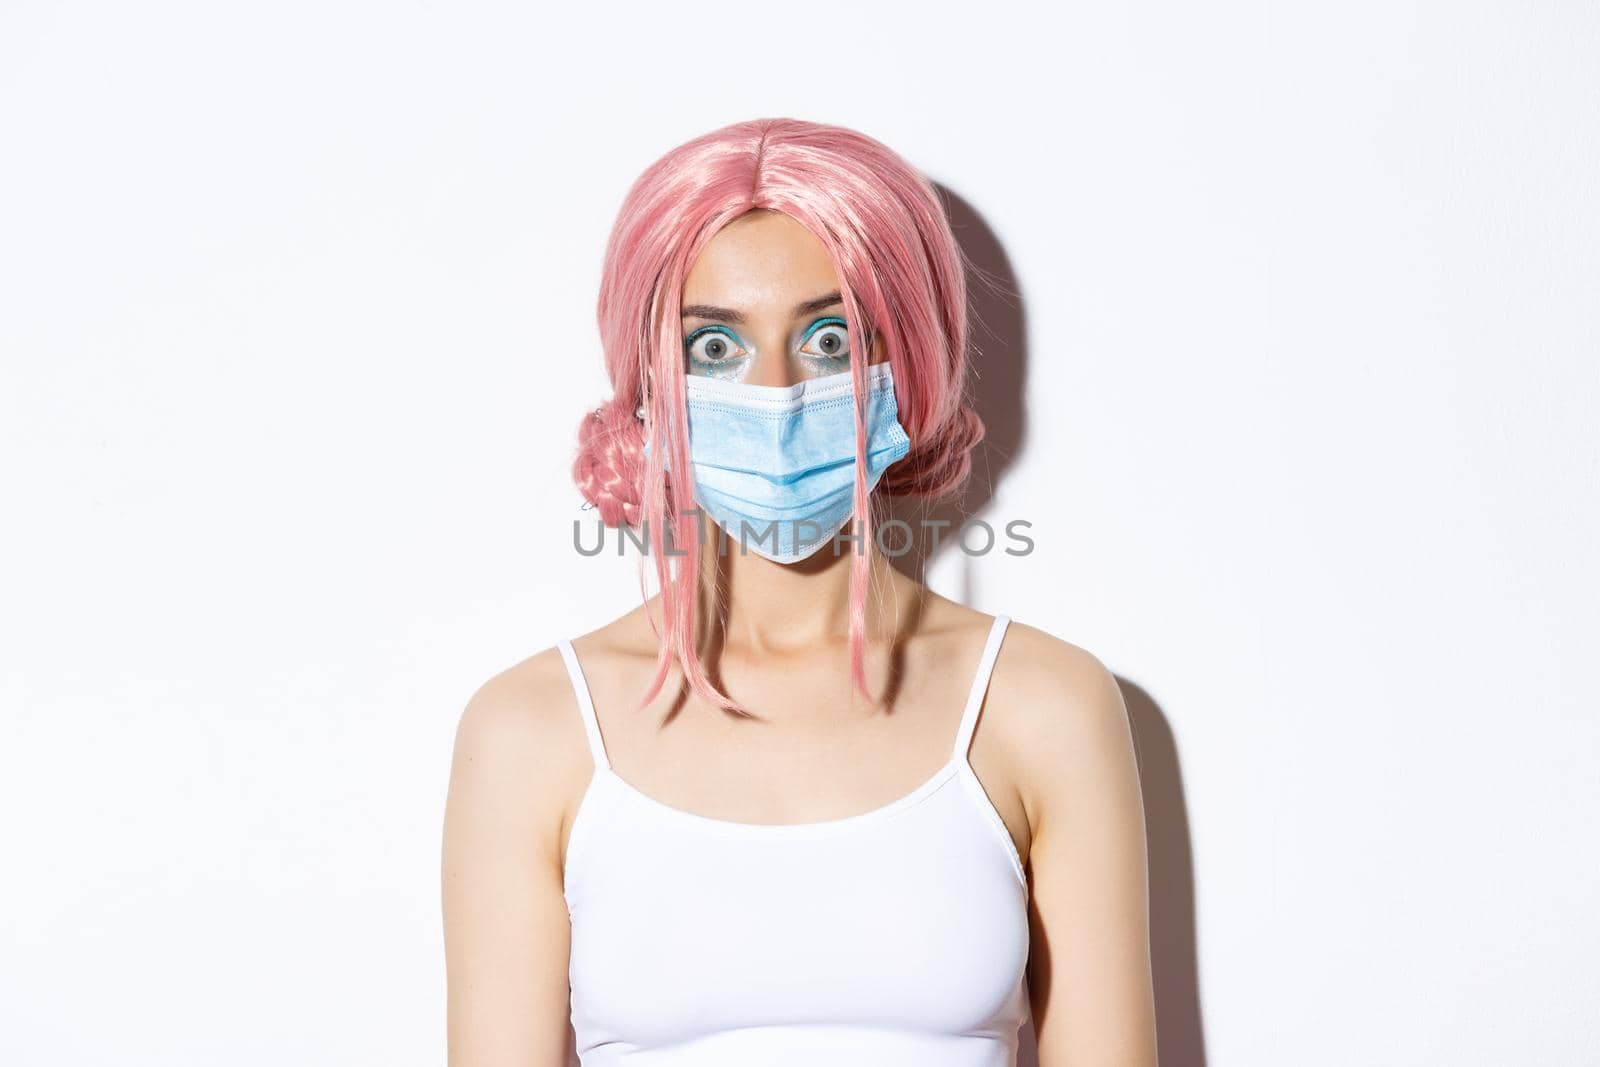 Close-up of surprised girl in pink wig and medical mask looking at camera amazed, protect herself against coronavirus disease, standing over white background.